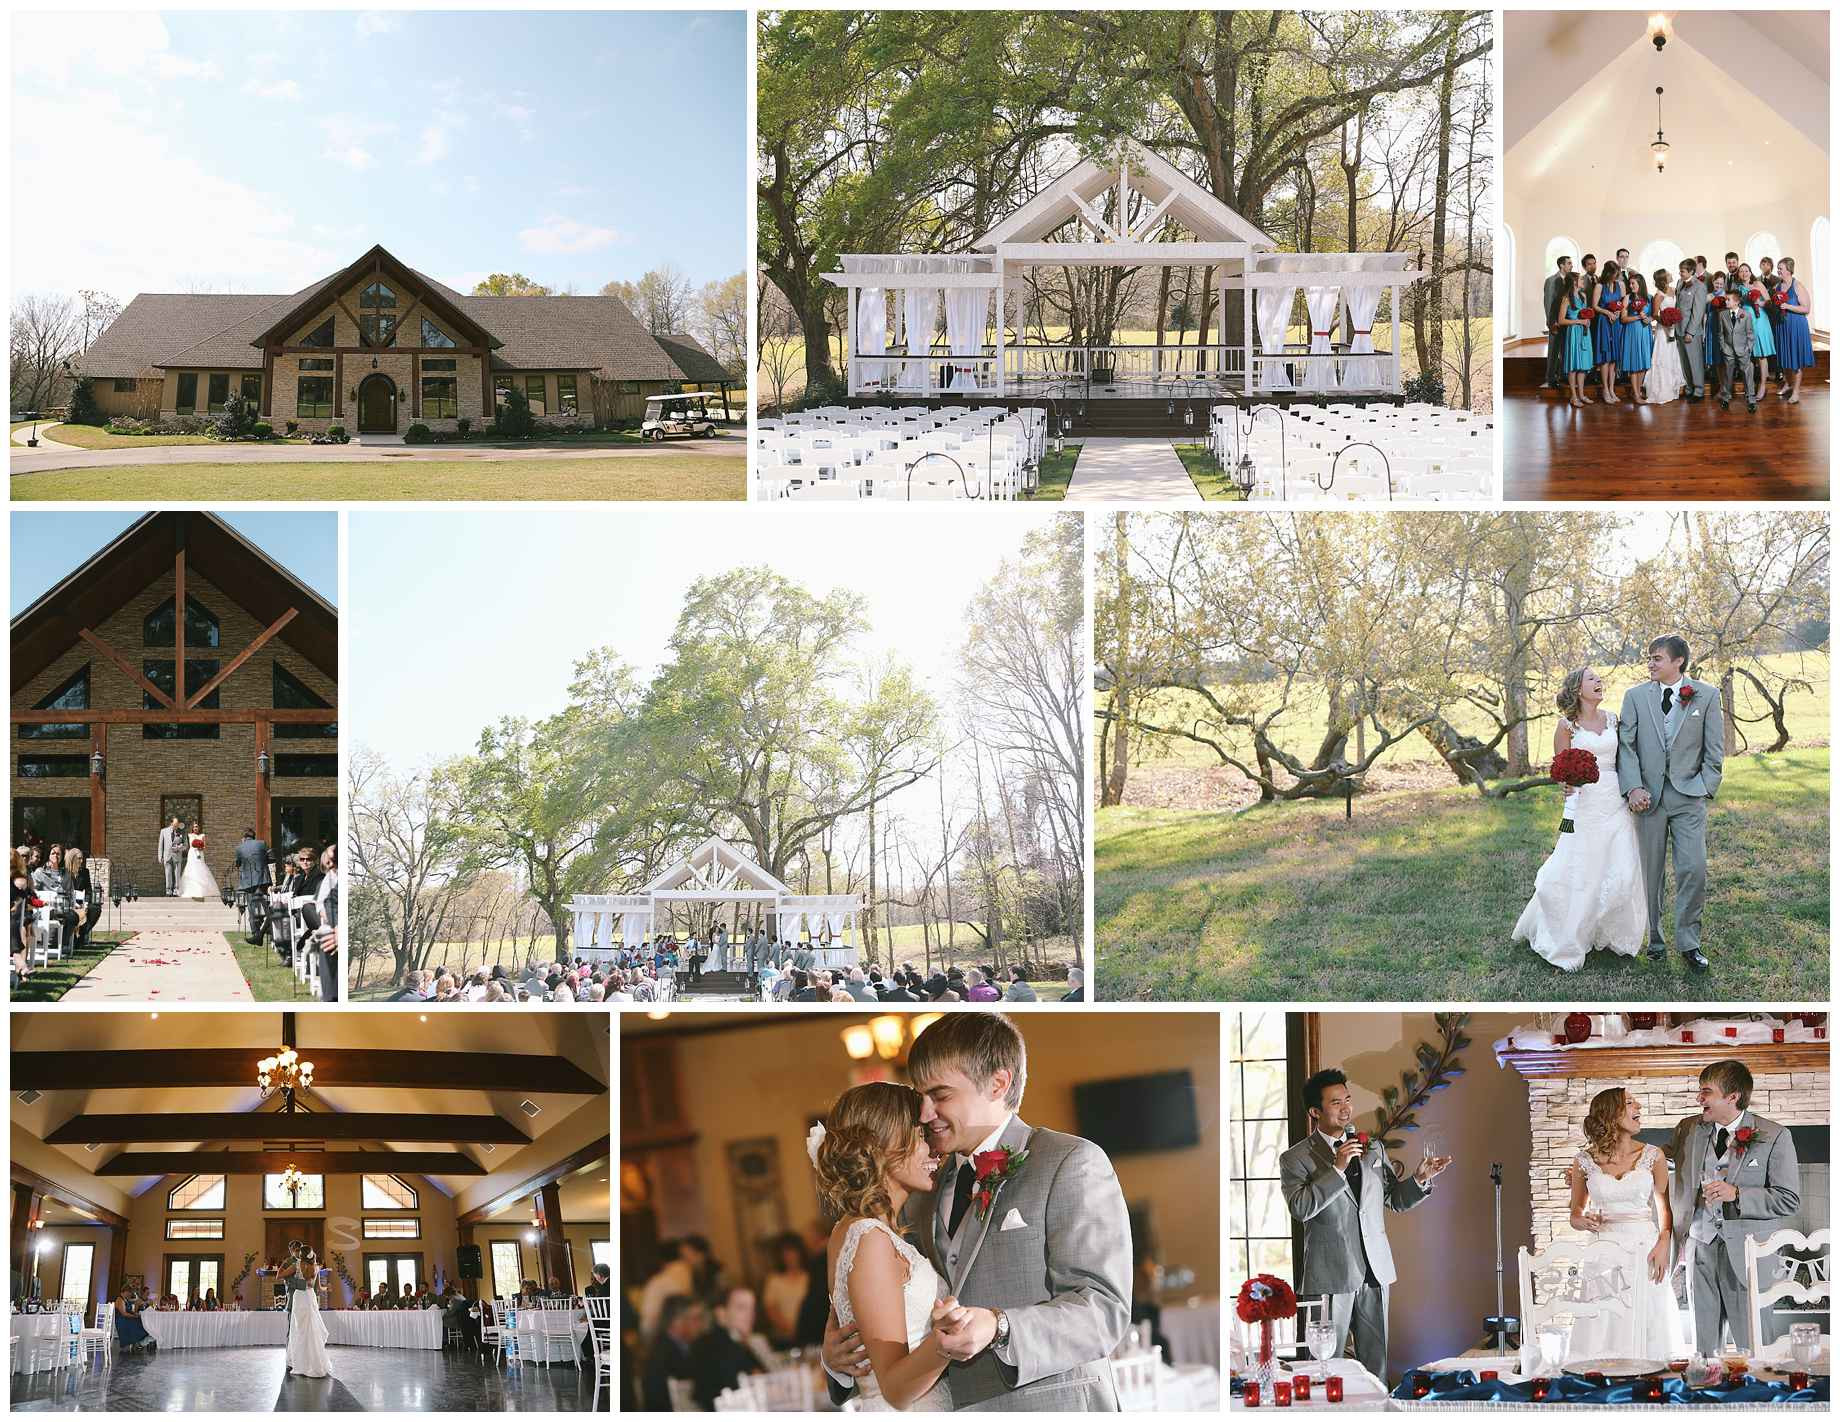 Wedding Venues In East Texas
 10 Amazing Places to Get Married In East Texas